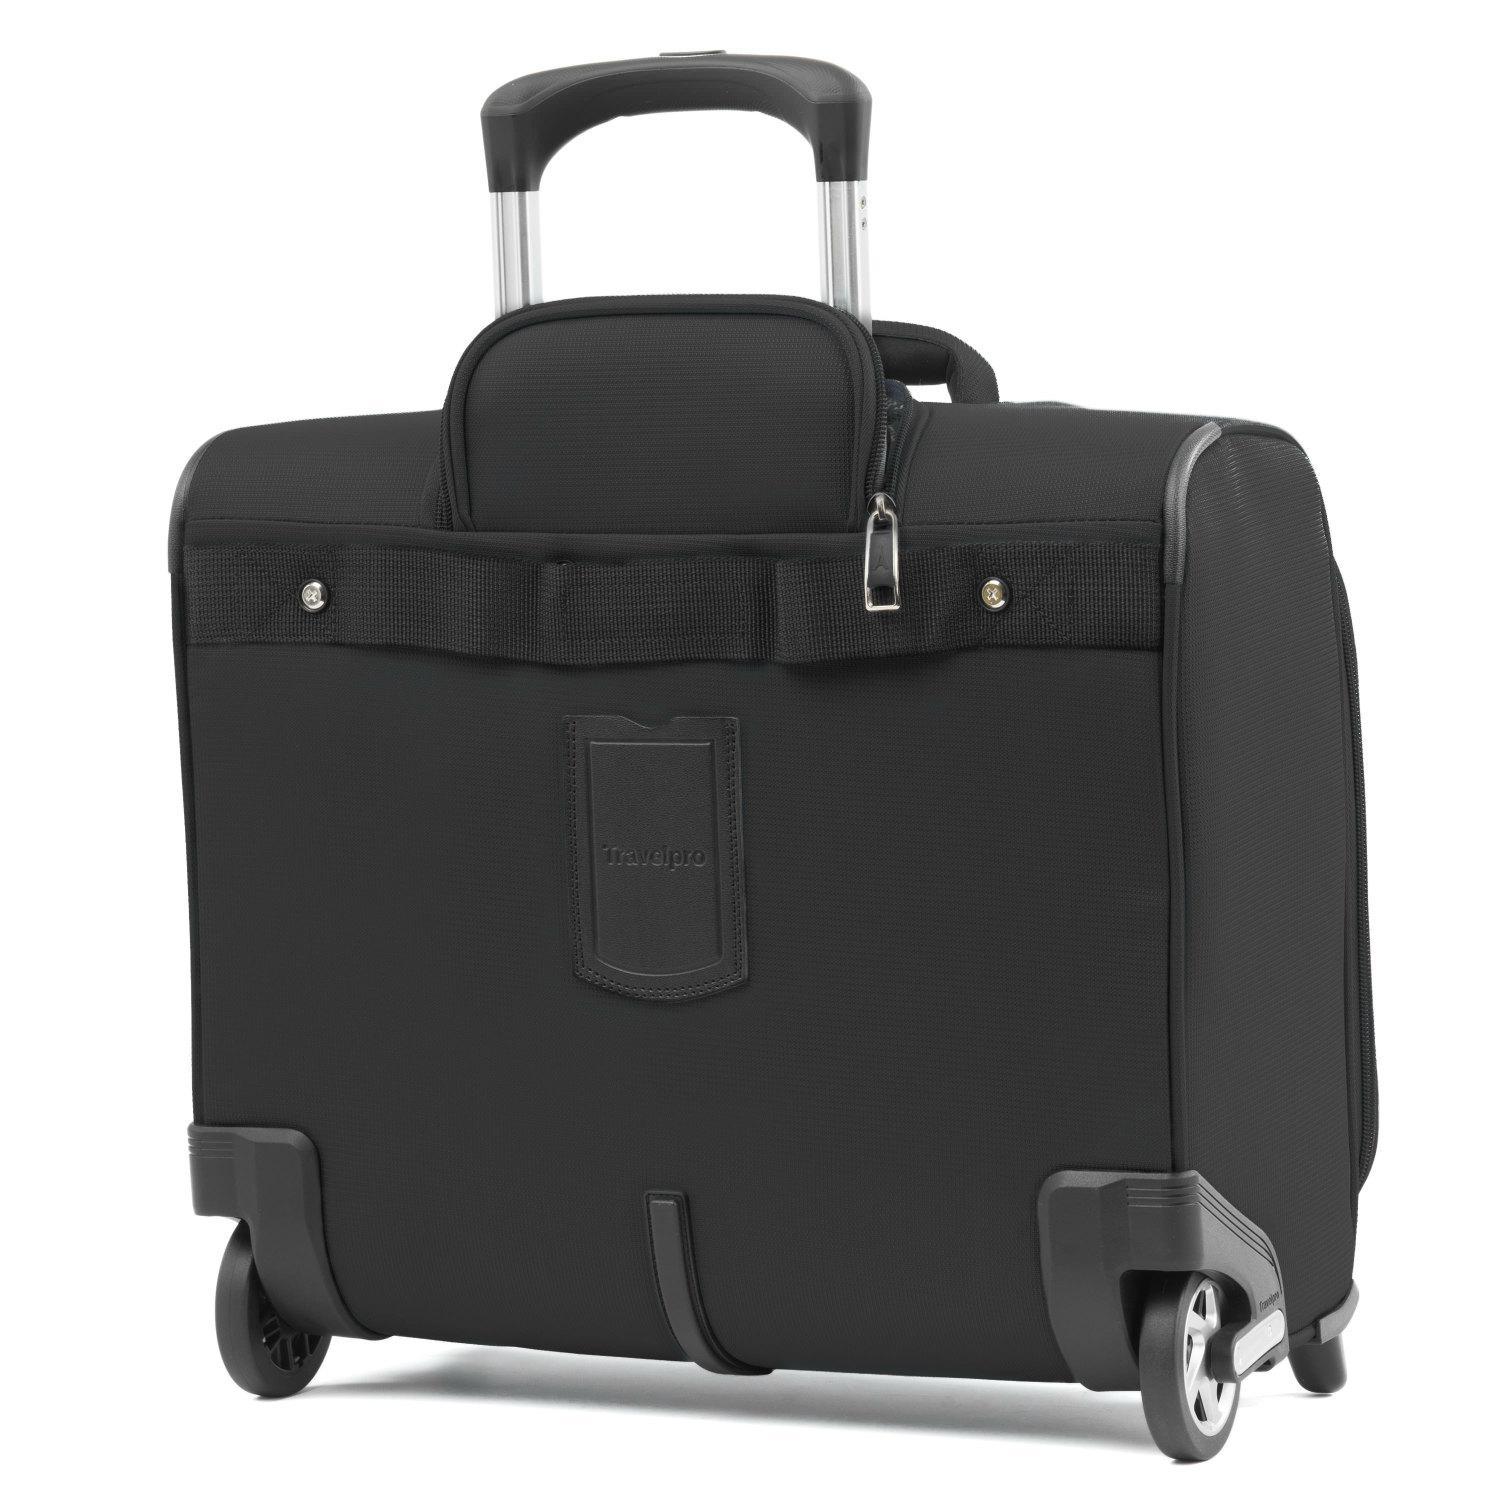 Travelpro Maxlite 5 Lightweight Carry-on Rolling Tote – Luggage Pros